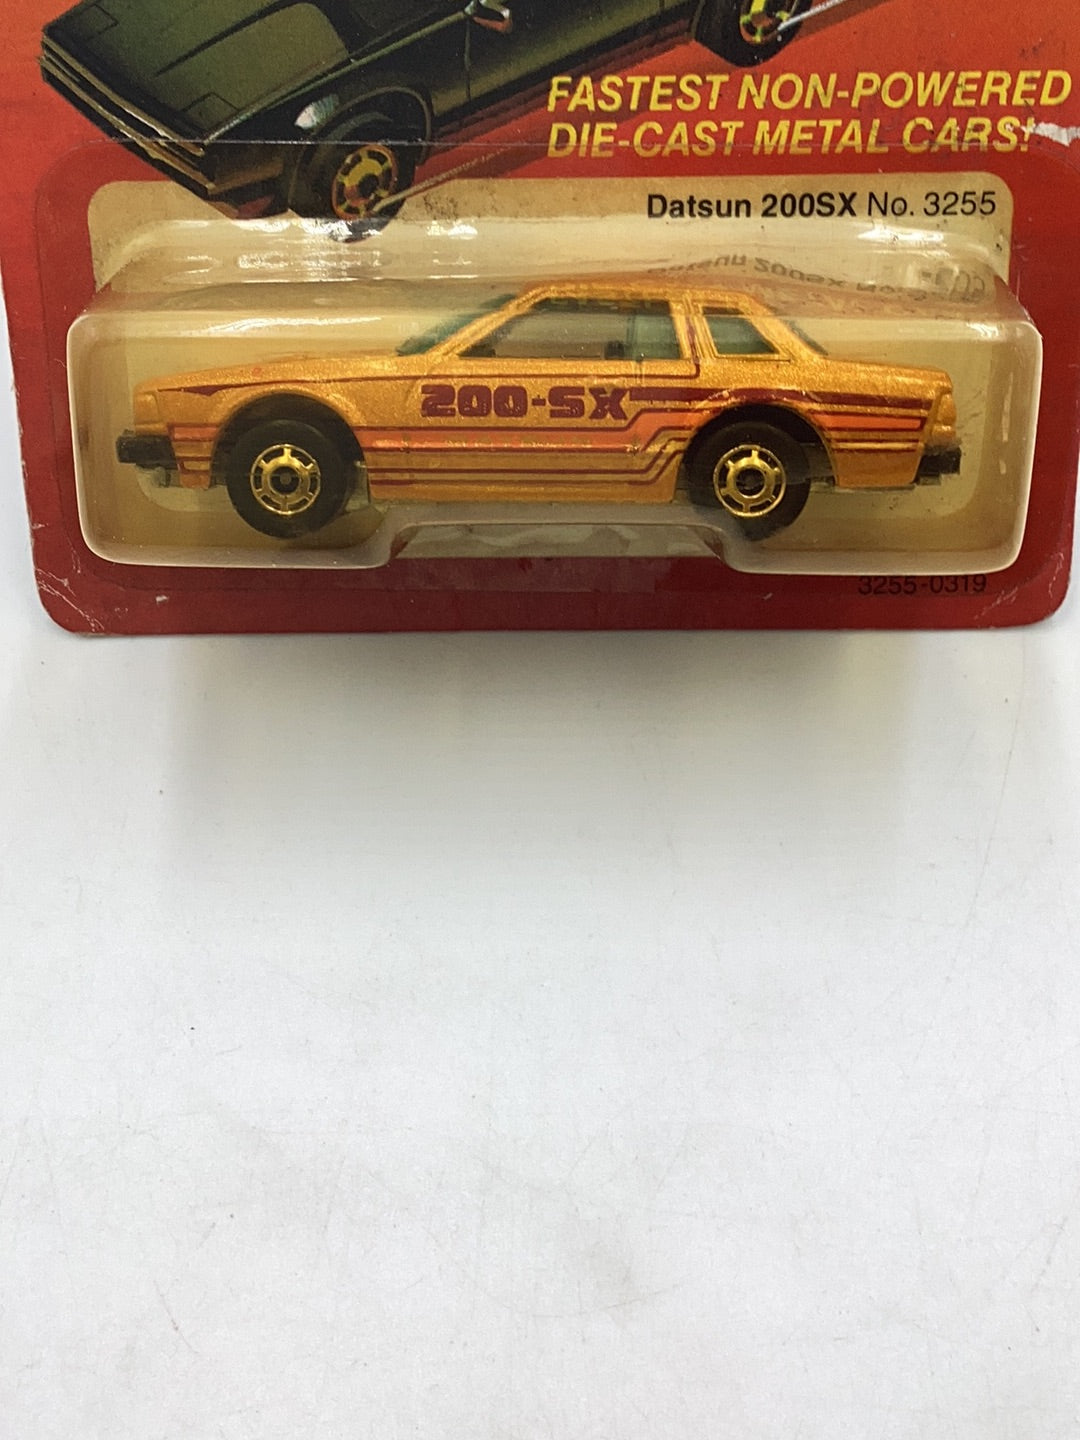 Hot Wheels The Hot Ones Datsun 200SX with protector